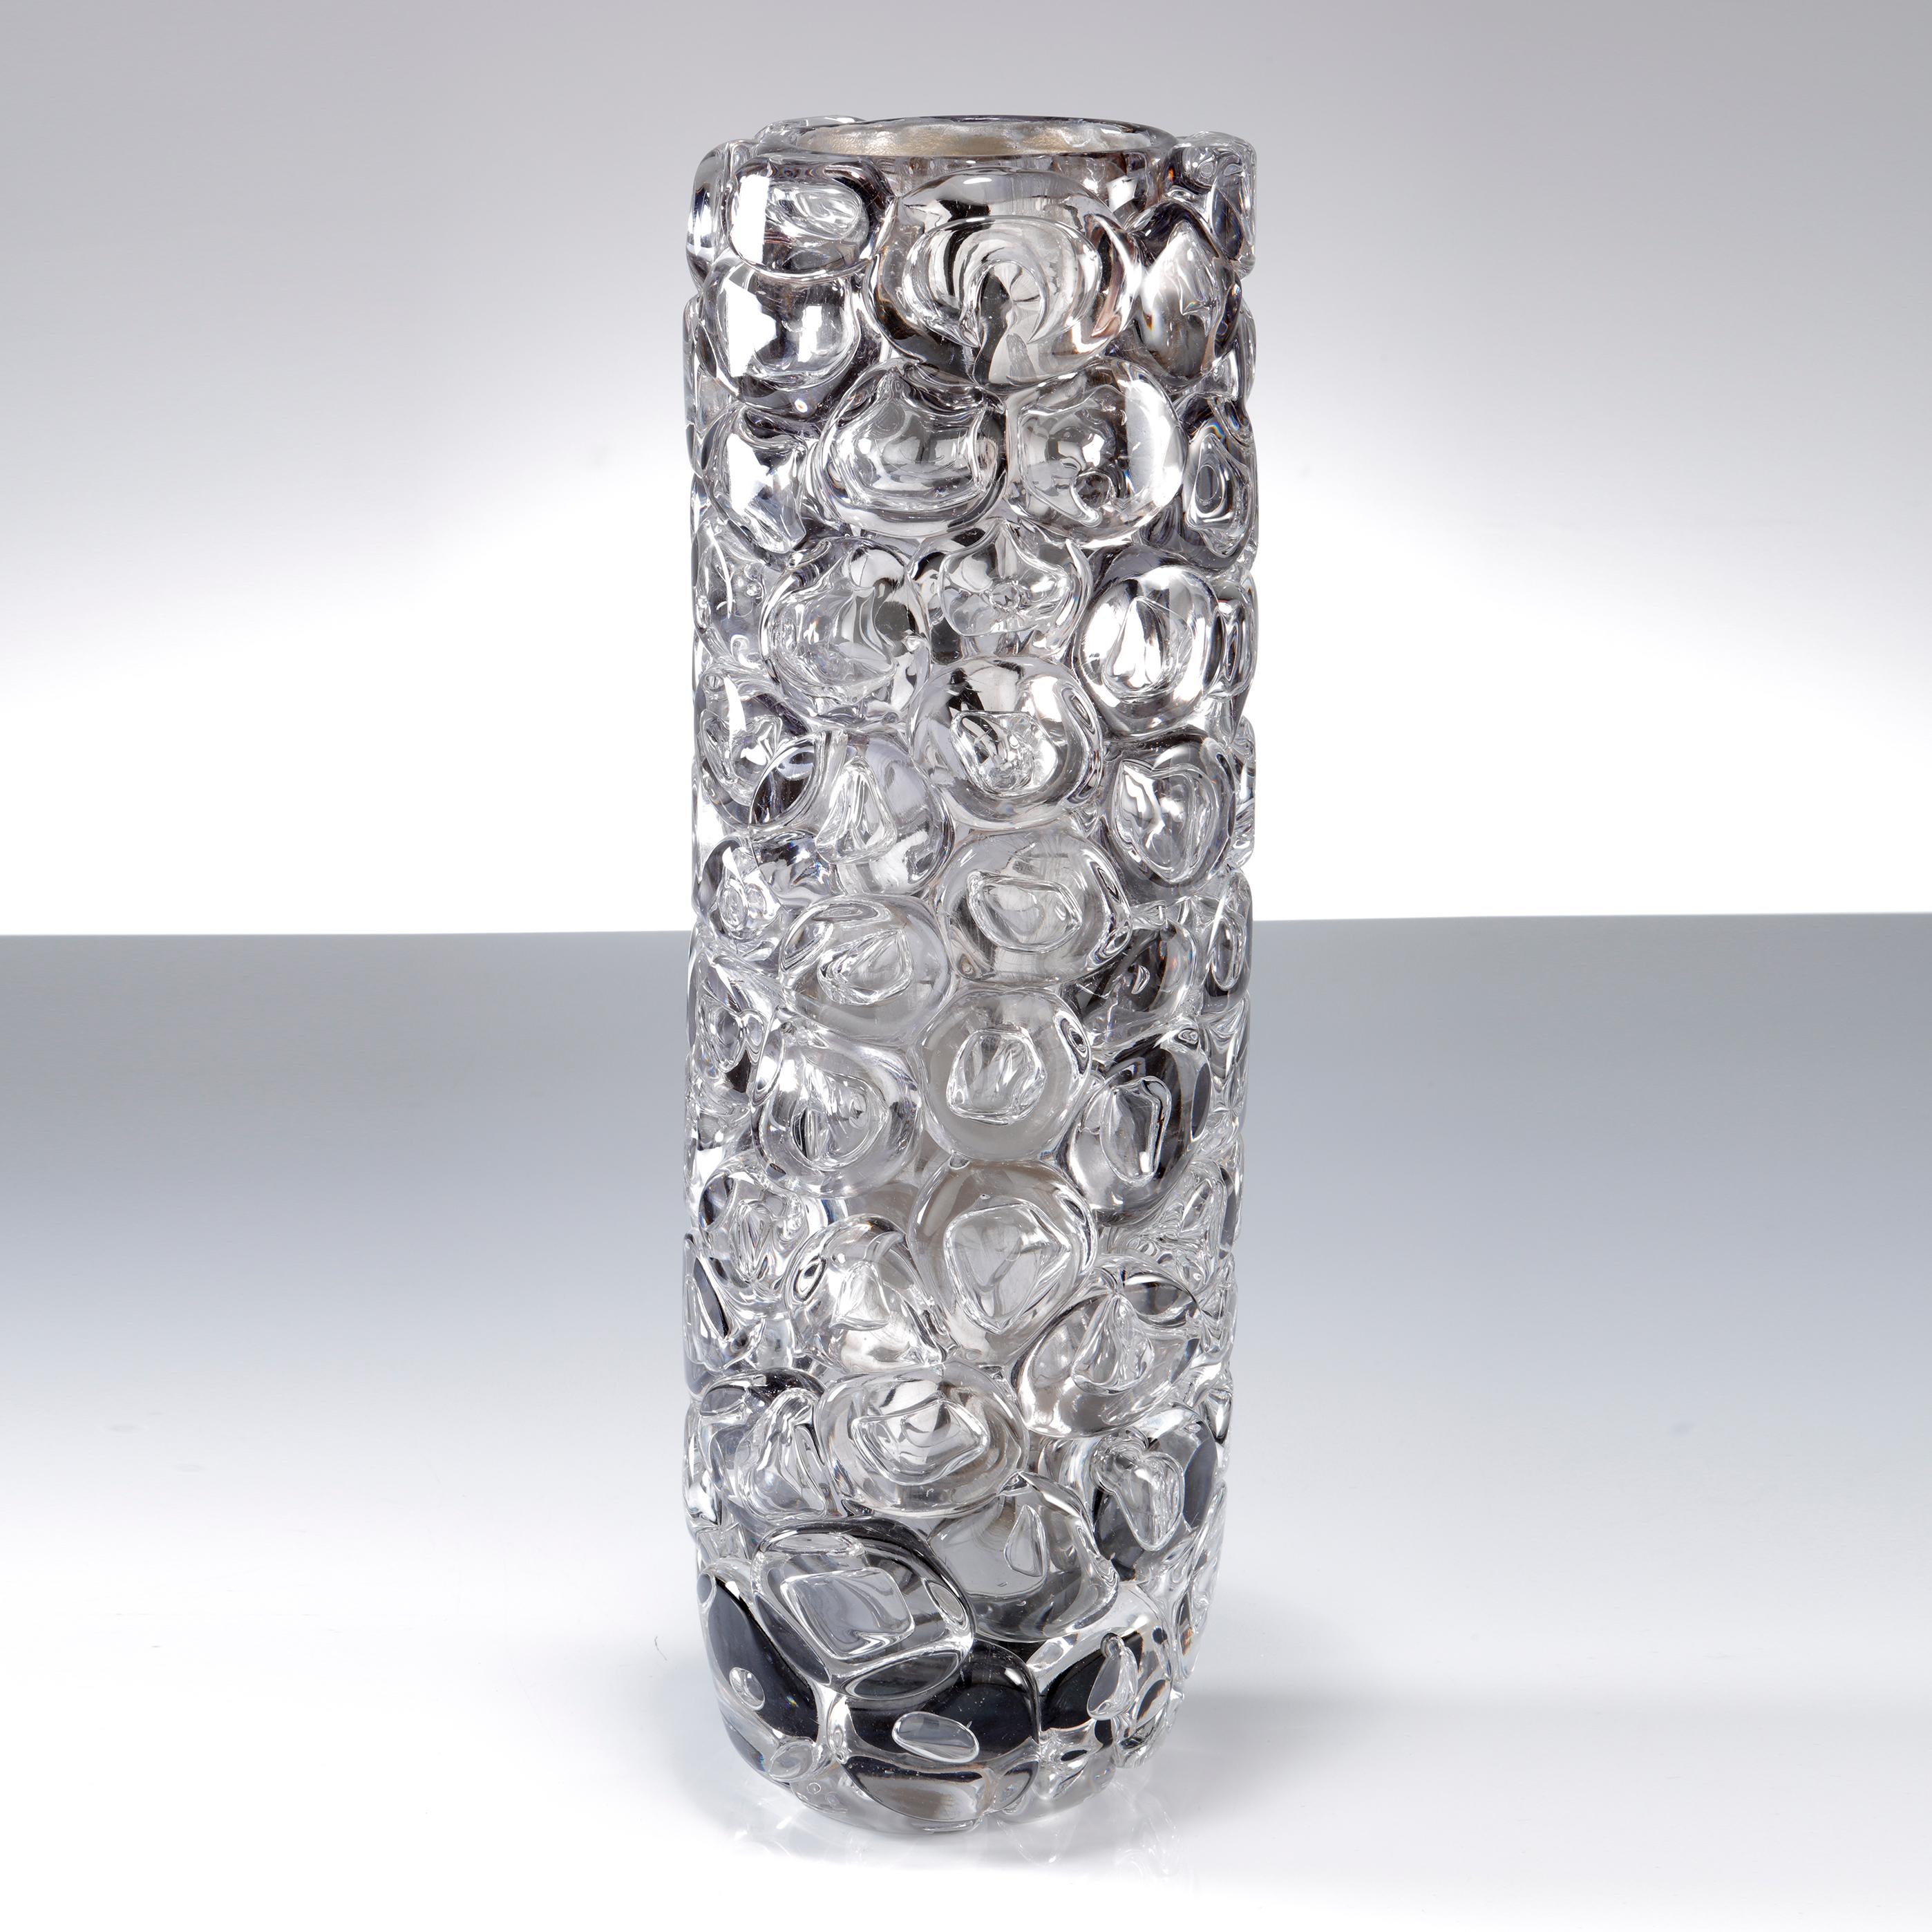 British Bubblewrap in Monochrome II, a Silver and Clear Glass Vase by Allister Malcolm